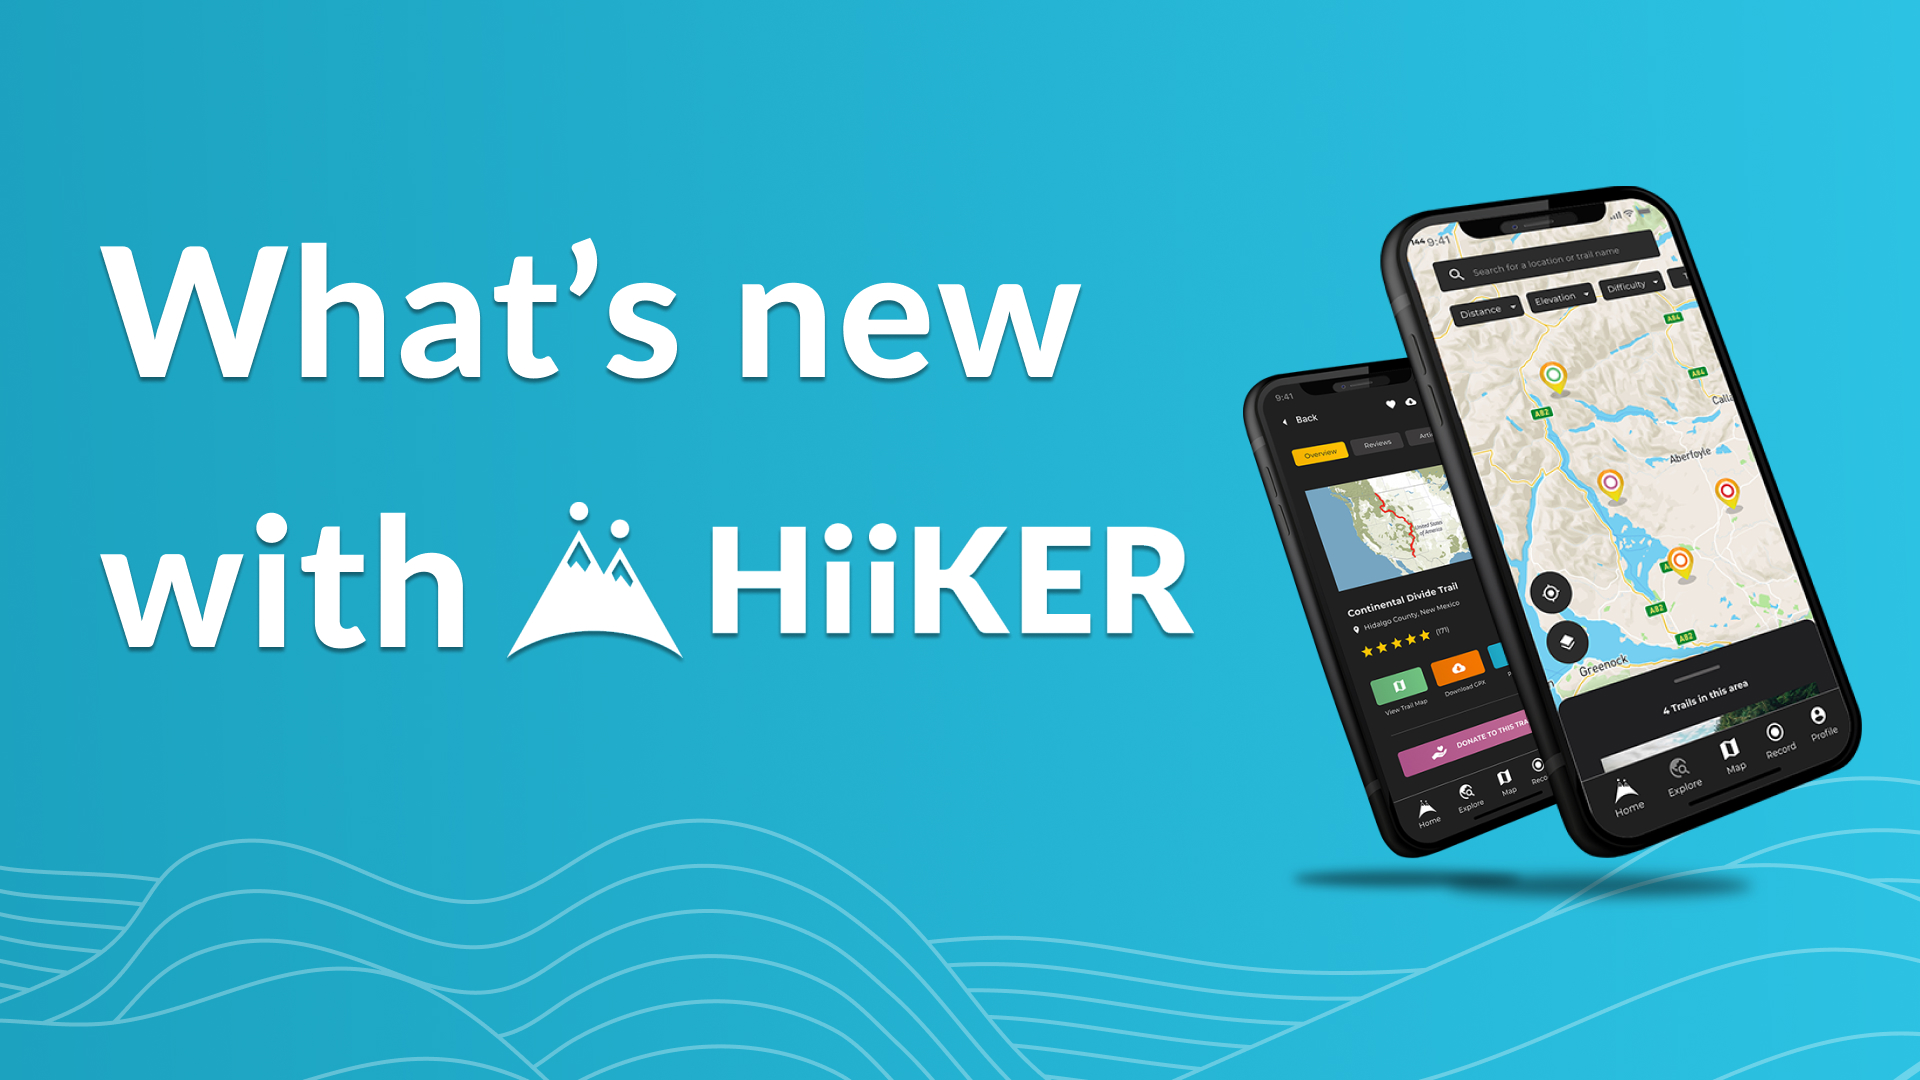 What’s new with HiiKER? New Functionality & more picture